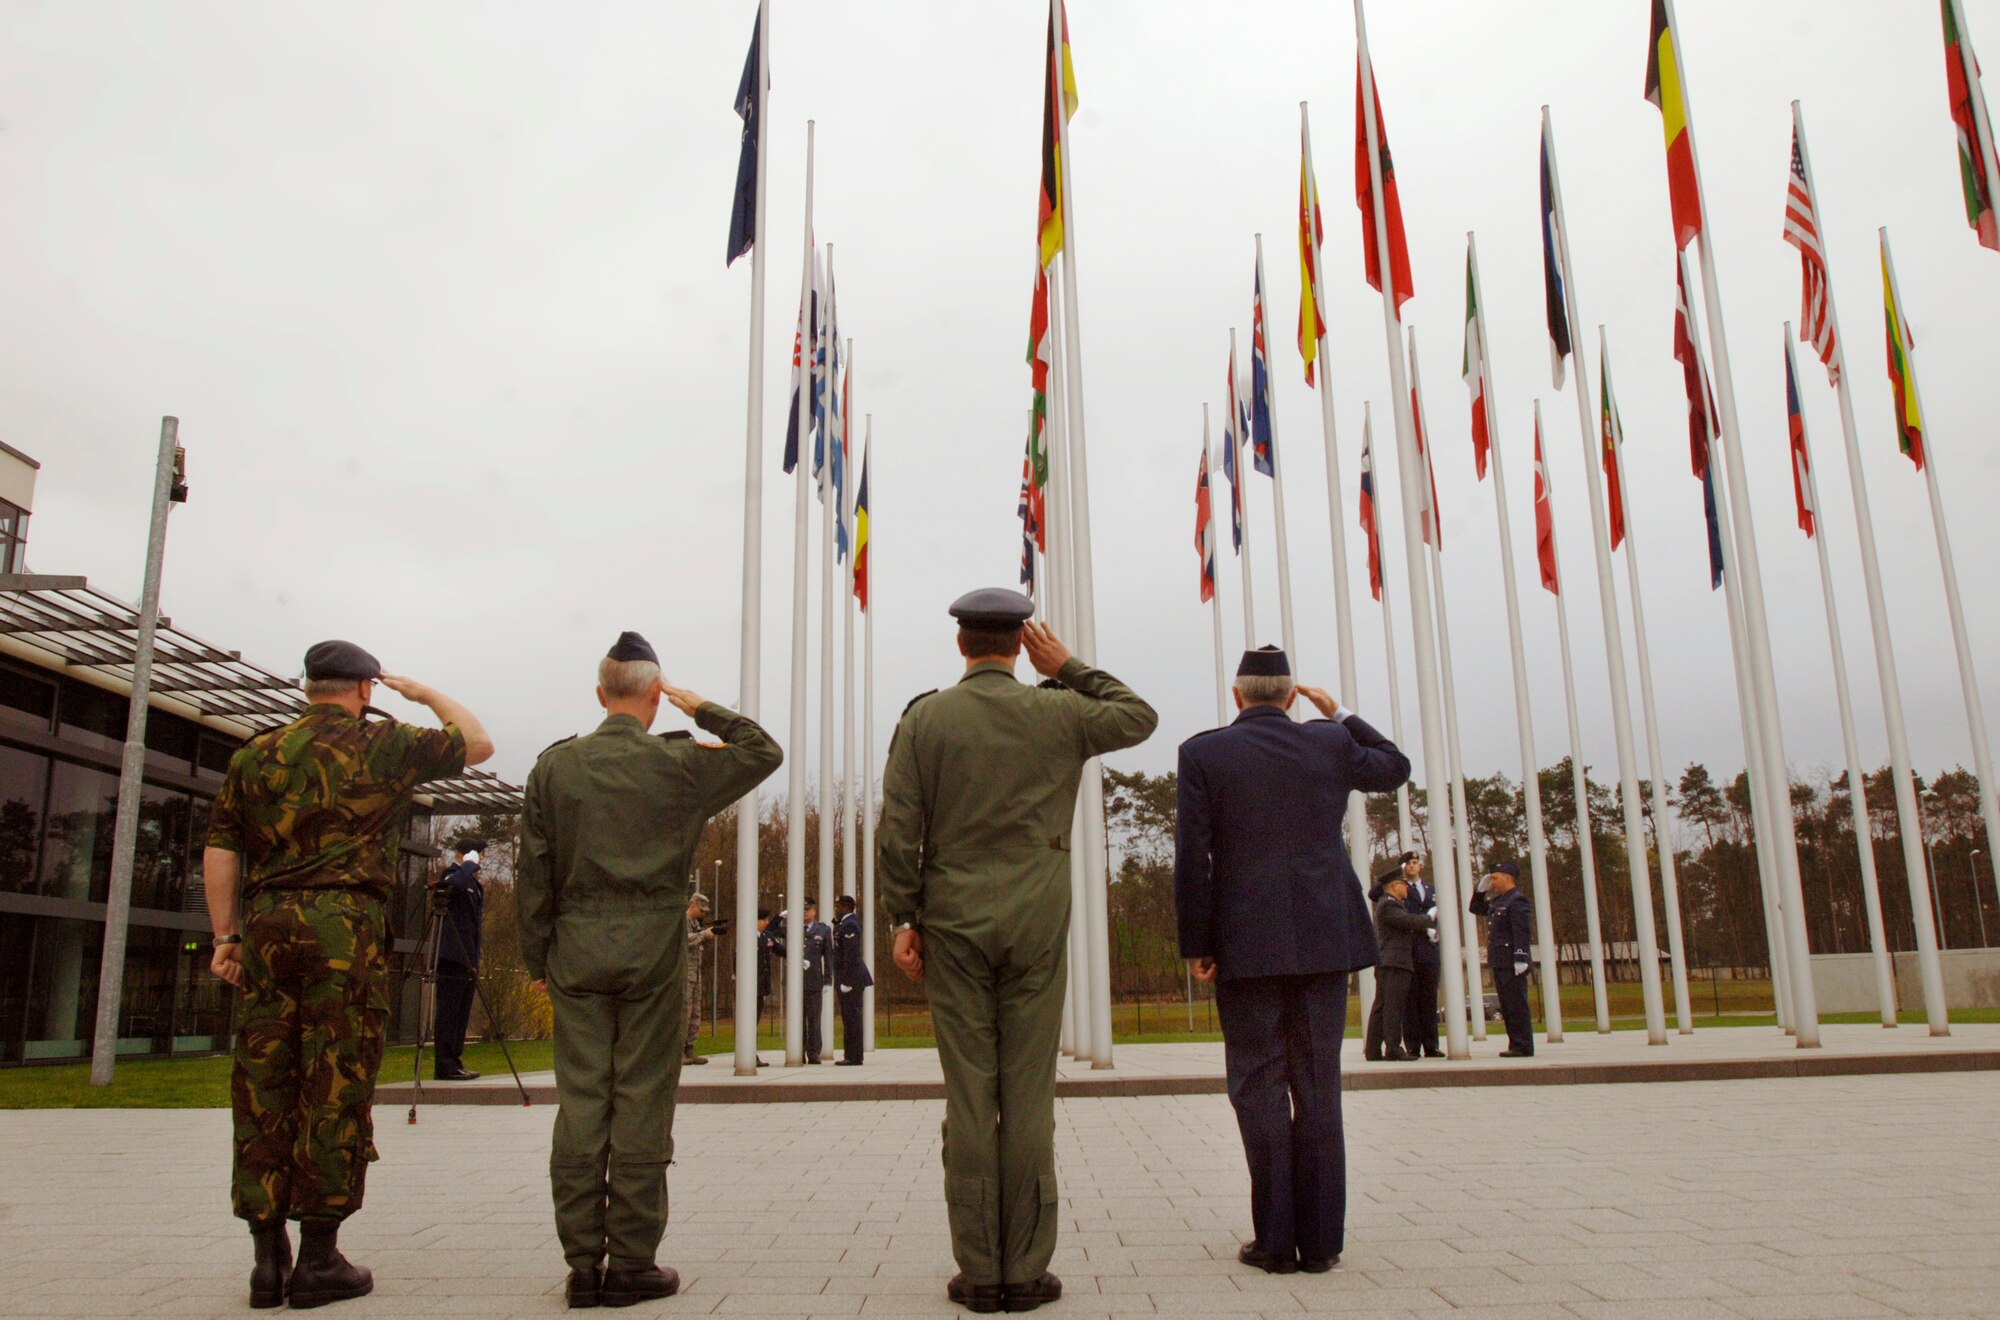 NATO Allied Air Component officials at Ramstein Air Base, Germany, salute during an April 8, 2009, flag ceremony marking the accession of Croatia and Albania as the 27th and 28th members of the alliance. Shown are (l to r) Warrant Officer Tim van der Loght, the component’s senior noncommissioned officer; Chief of Staff Maj. Gen. Jon Abma; Deputy Commander Air Marshal David Walker; and Gen. Roger A. Brady, commander of U.S. Air Forces in Europe and NATO Allied Air Component Command. (Department of Defense photo by Master Sgt. Scott Wagers / Defense Media Activity-Europe)